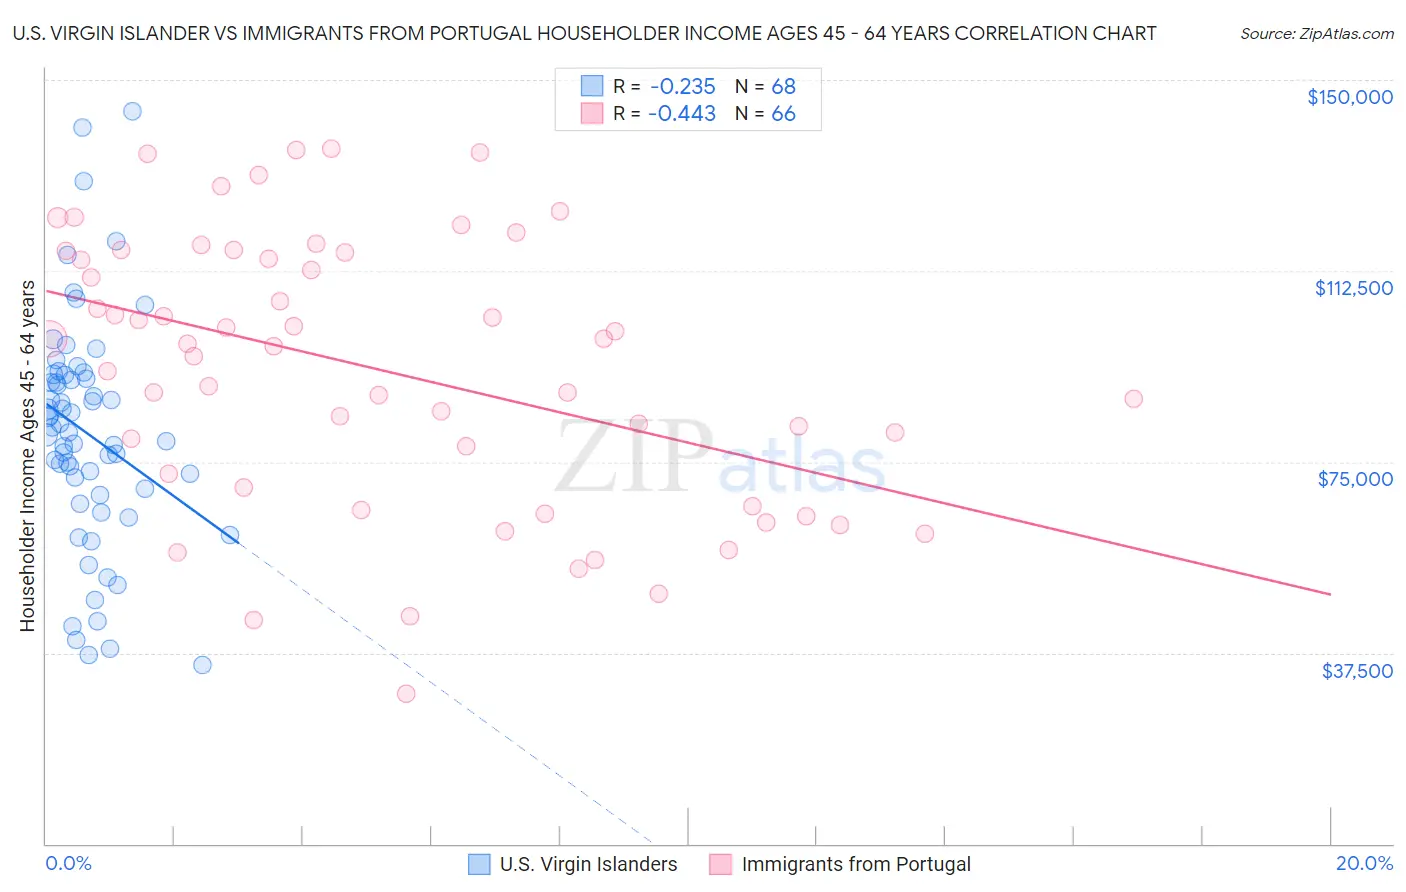 U.S. Virgin Islander vs Immigrants from Portugal Householder Income Ages 45 - 64 years